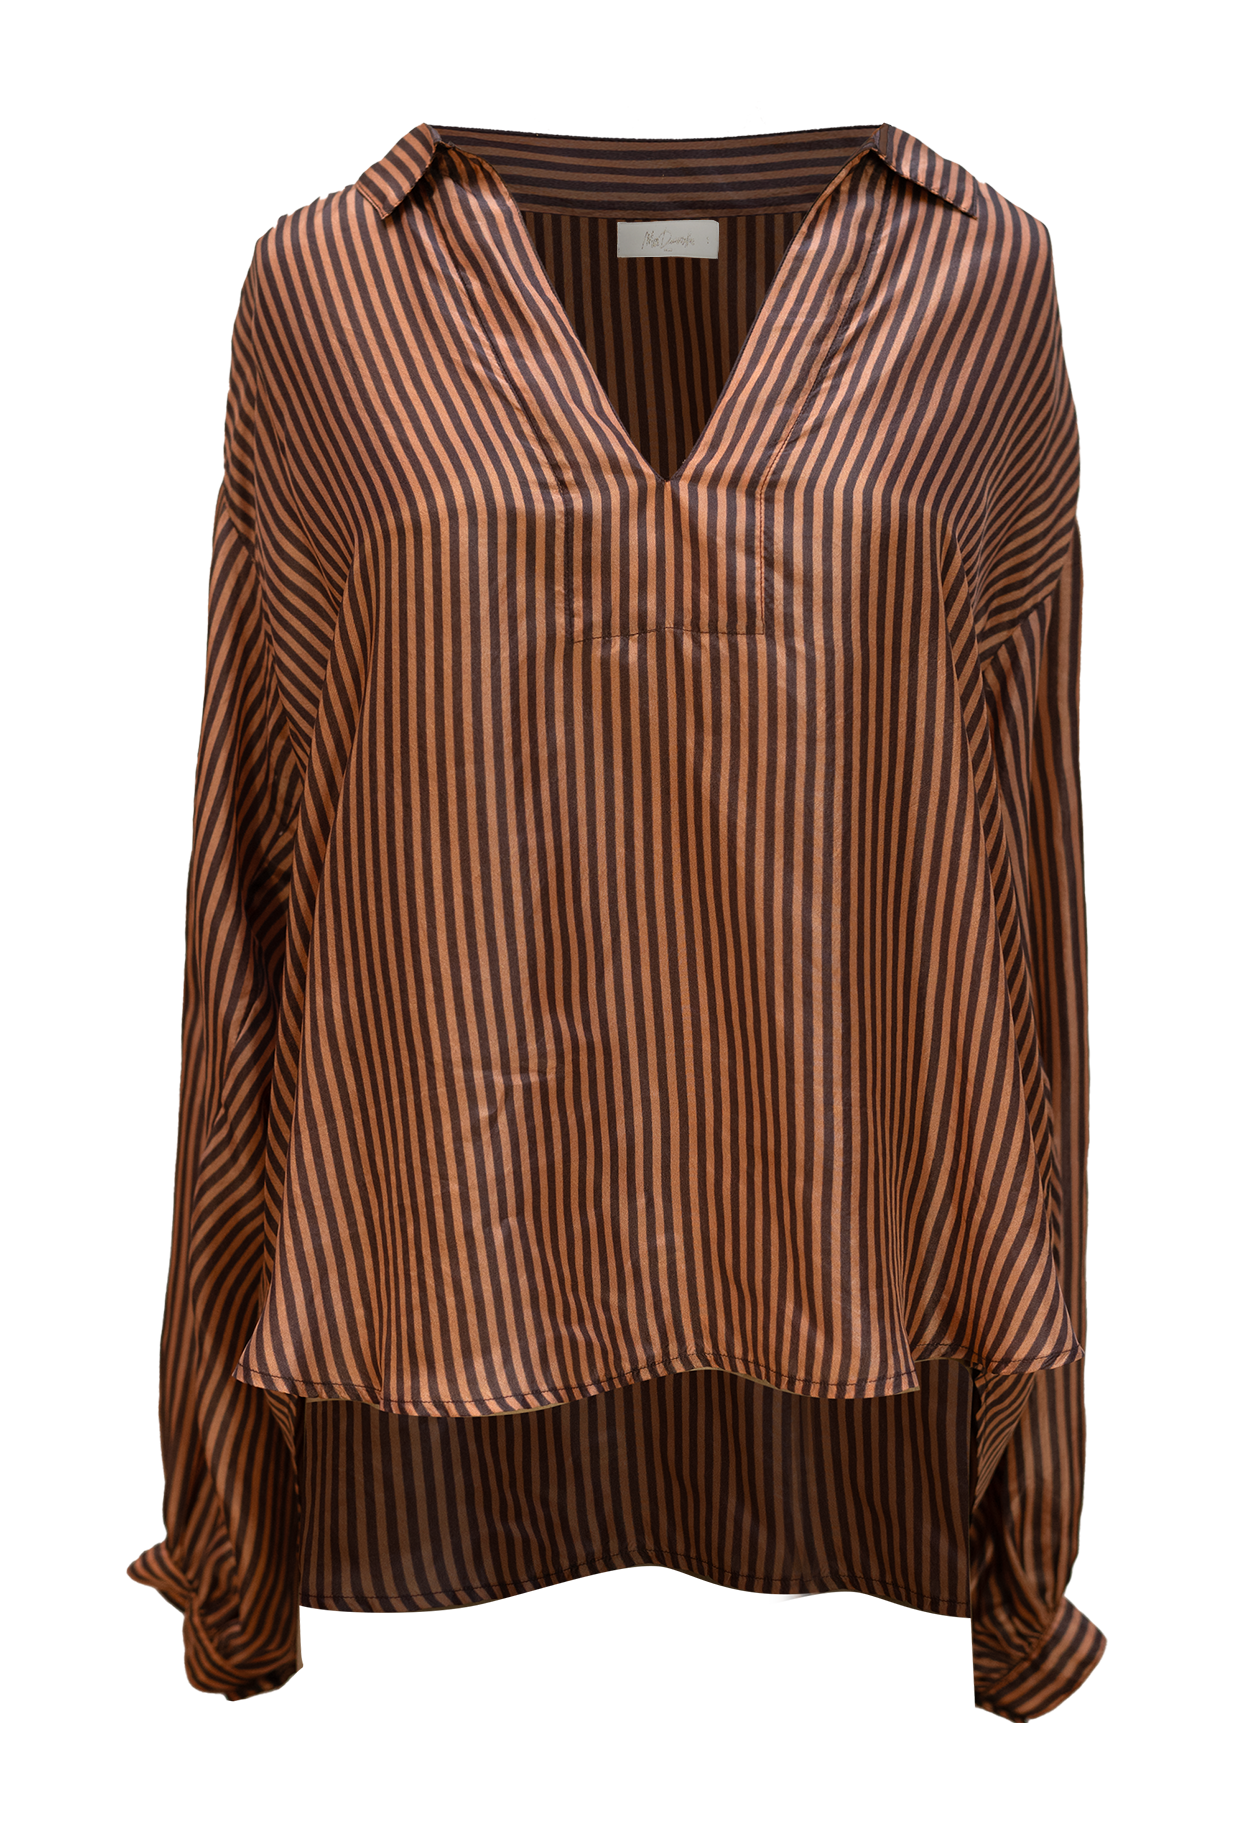 Brown striped silk top with notch neck and collar with long sleeves gathered at shoulder and cuff